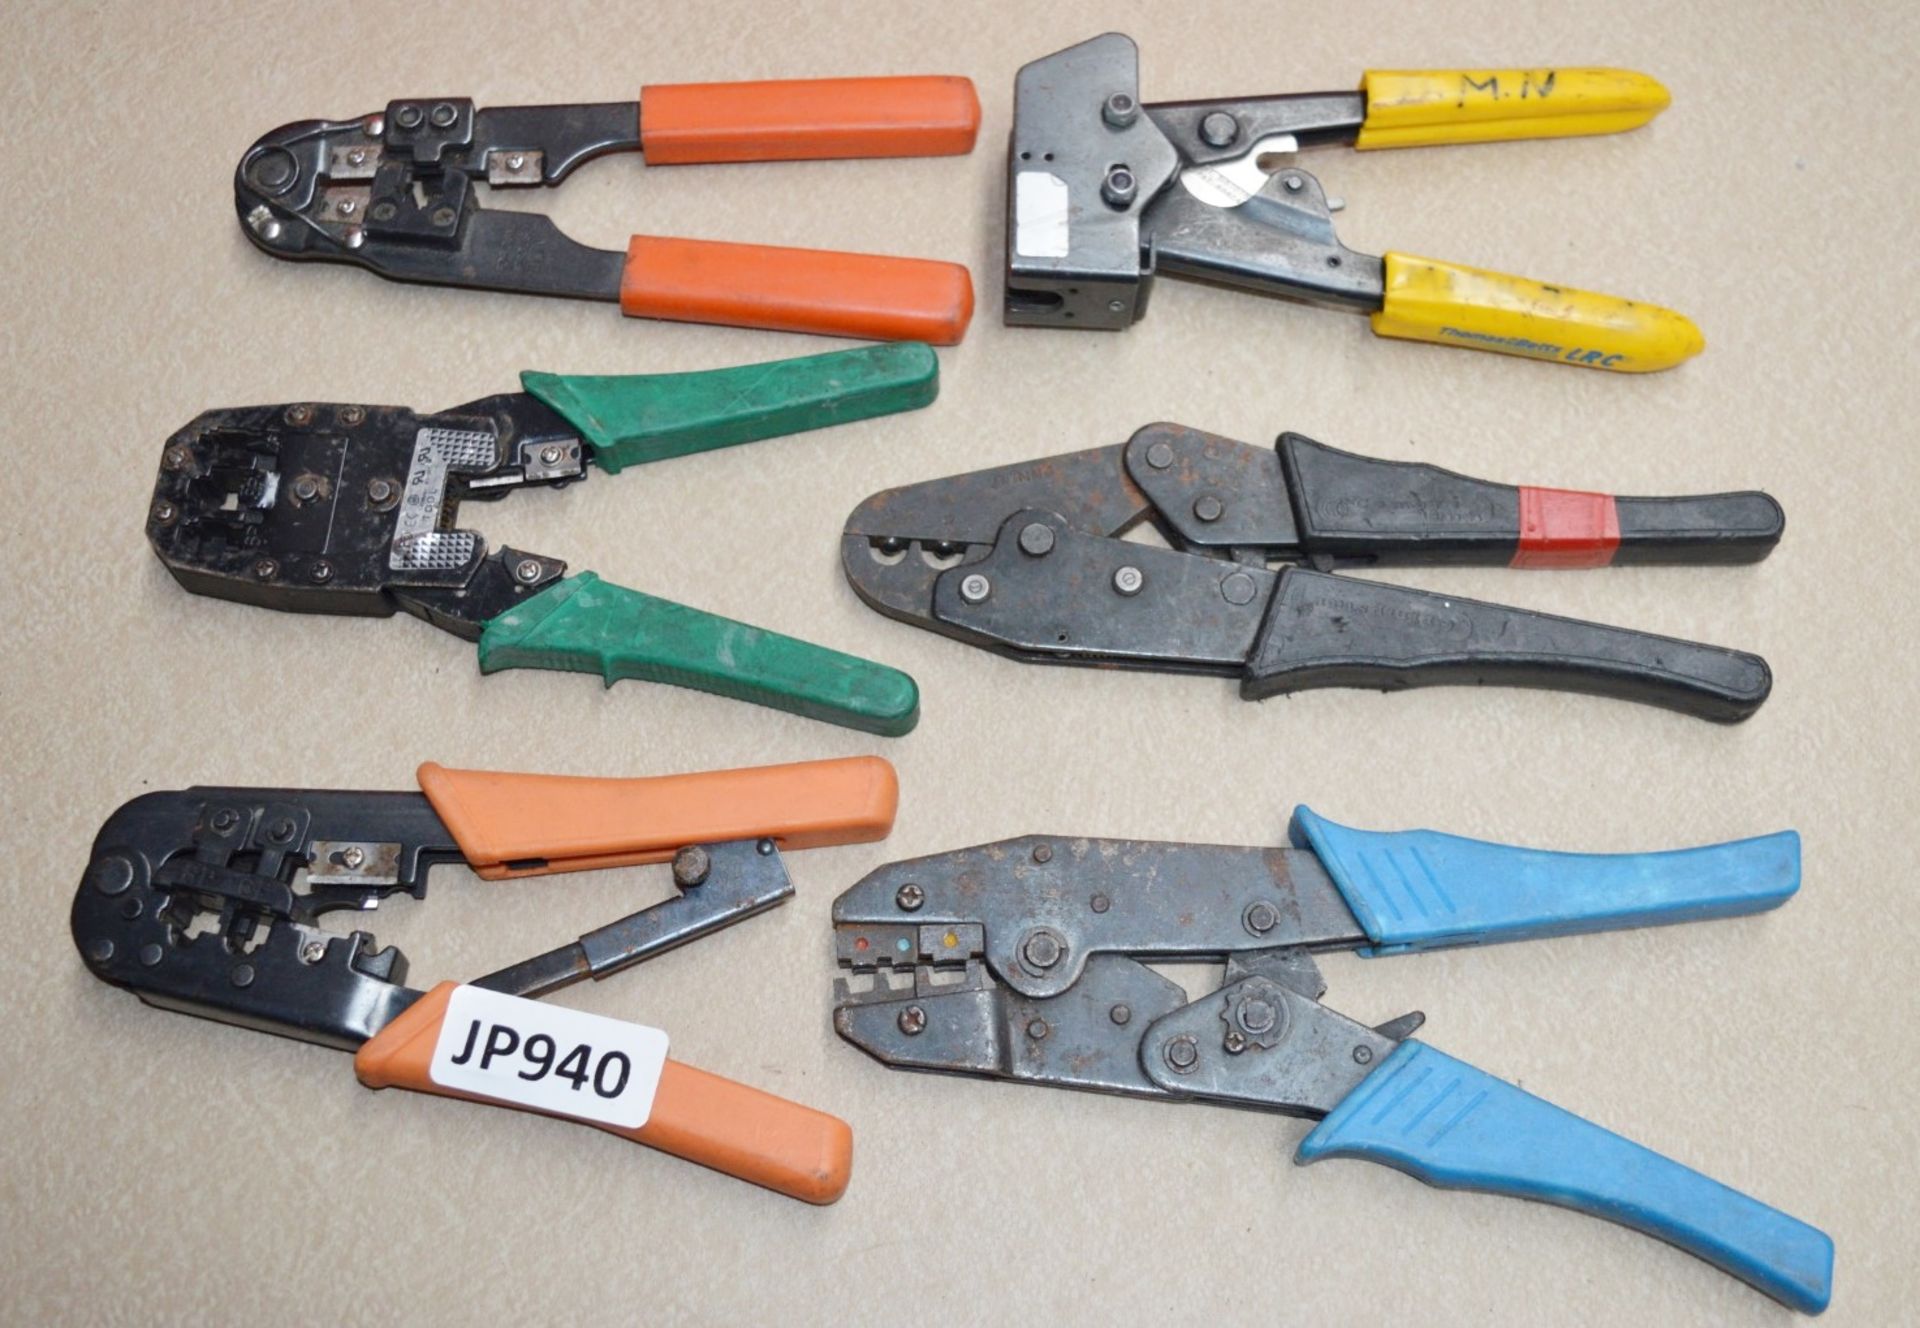 6 x Various Crimping Tools For Telecoms and Network Applications - CL011 - Ref JP940 - Location: